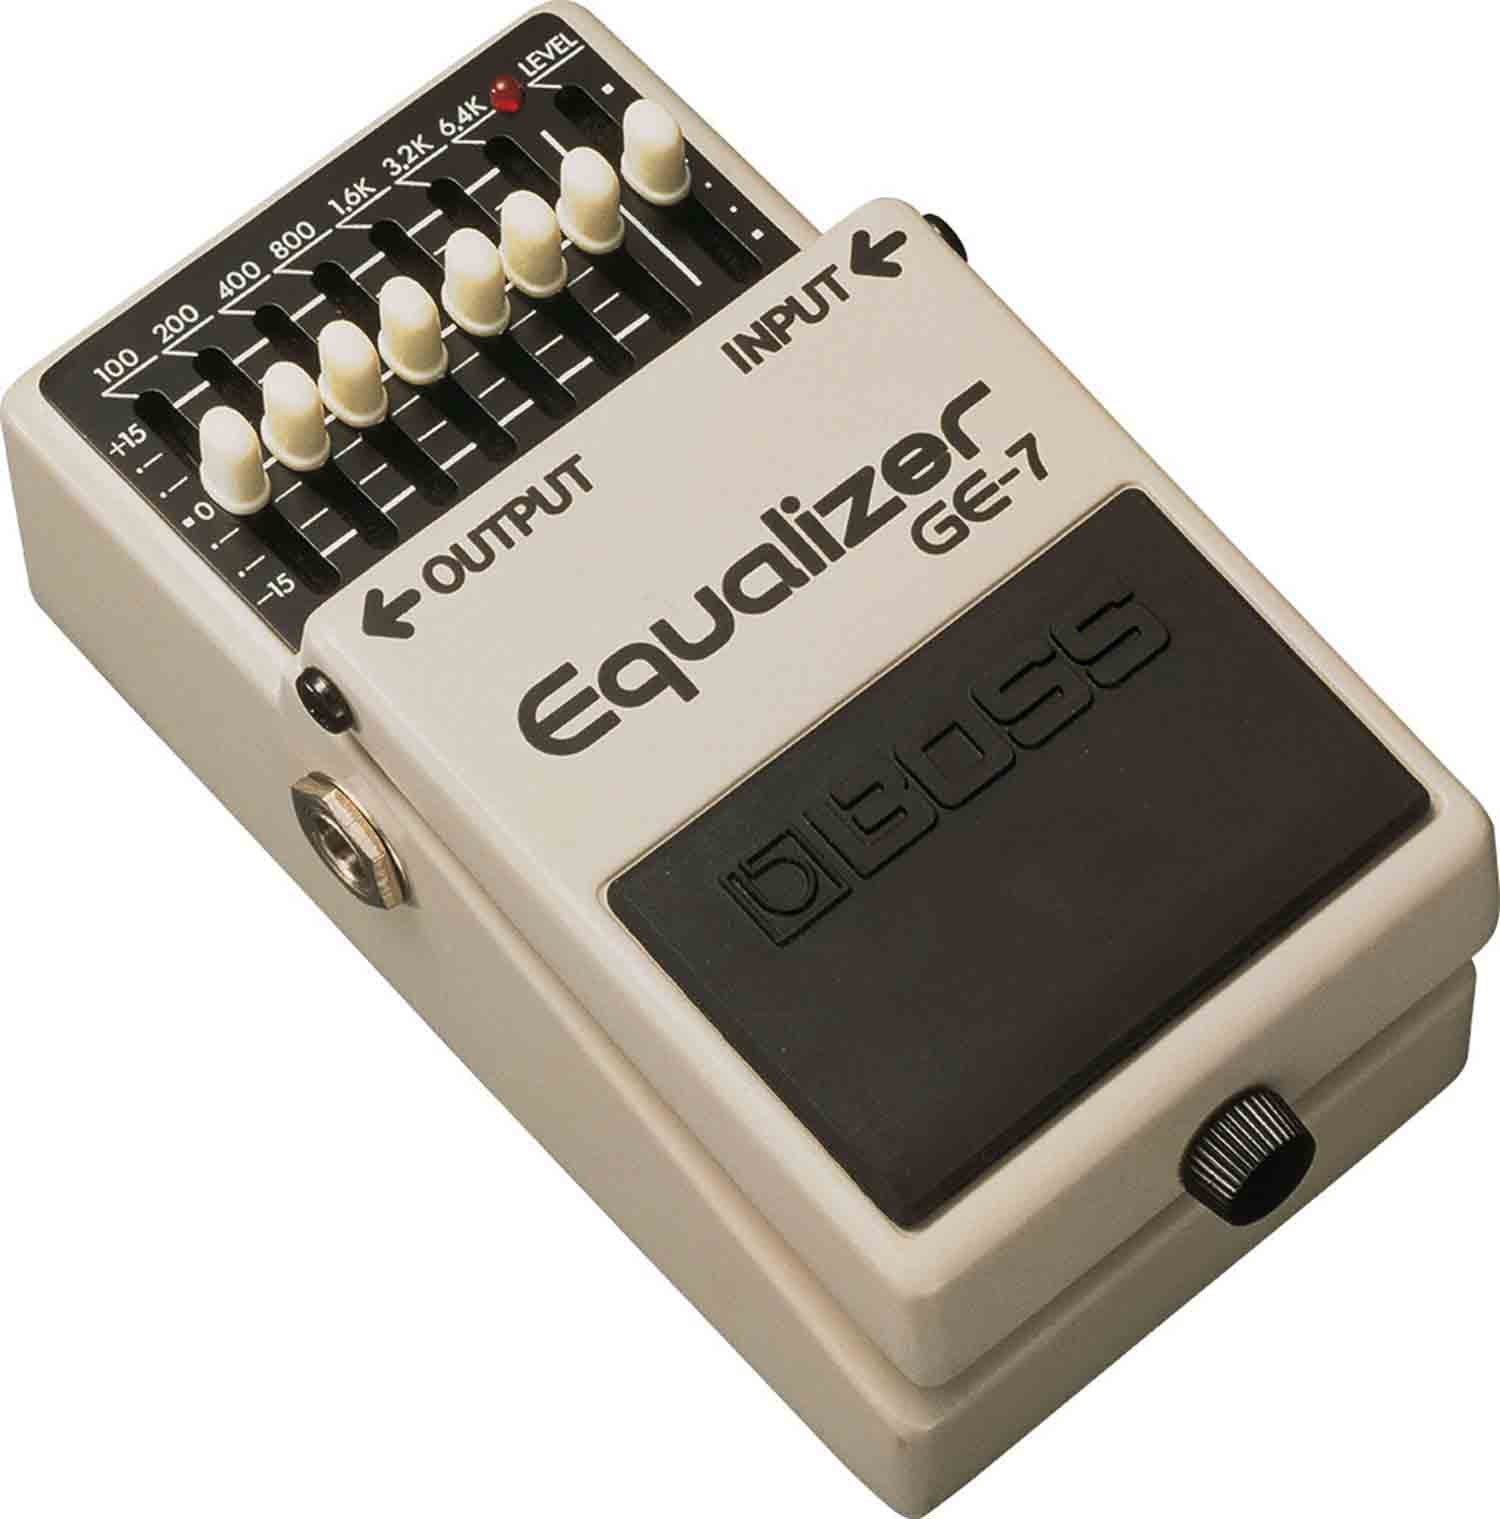 B-Stock: Boss GE-7, Graphic Equalizer Pedal - Hollywood DJ